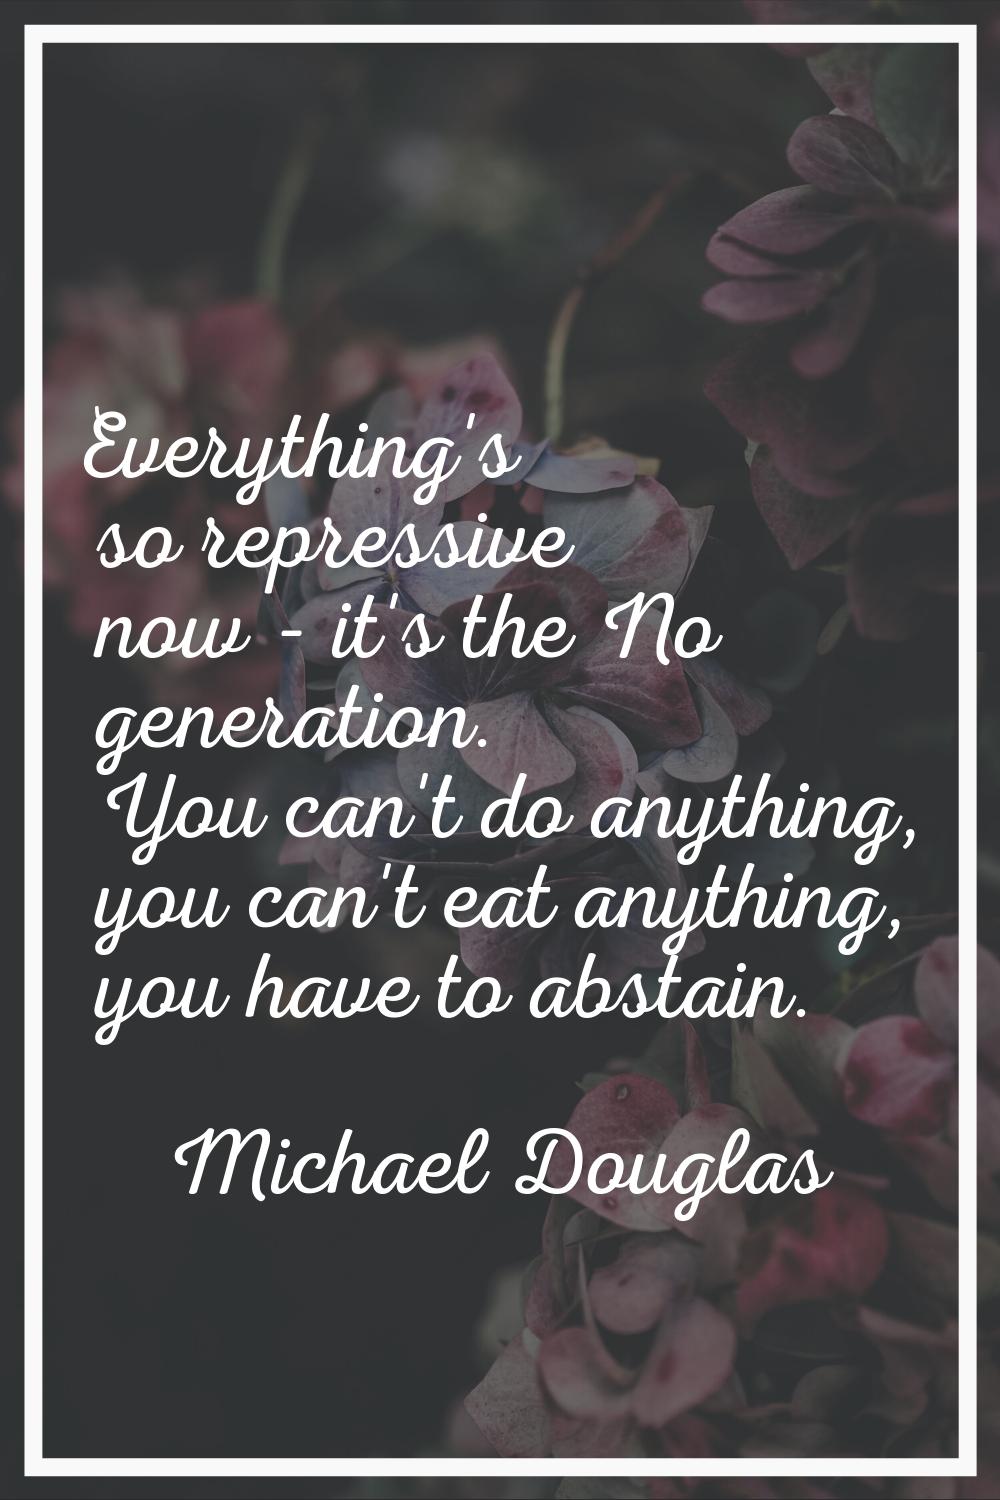 Everything's so repressive now - it's the No generation. You can't do anything, you can't eat anyth